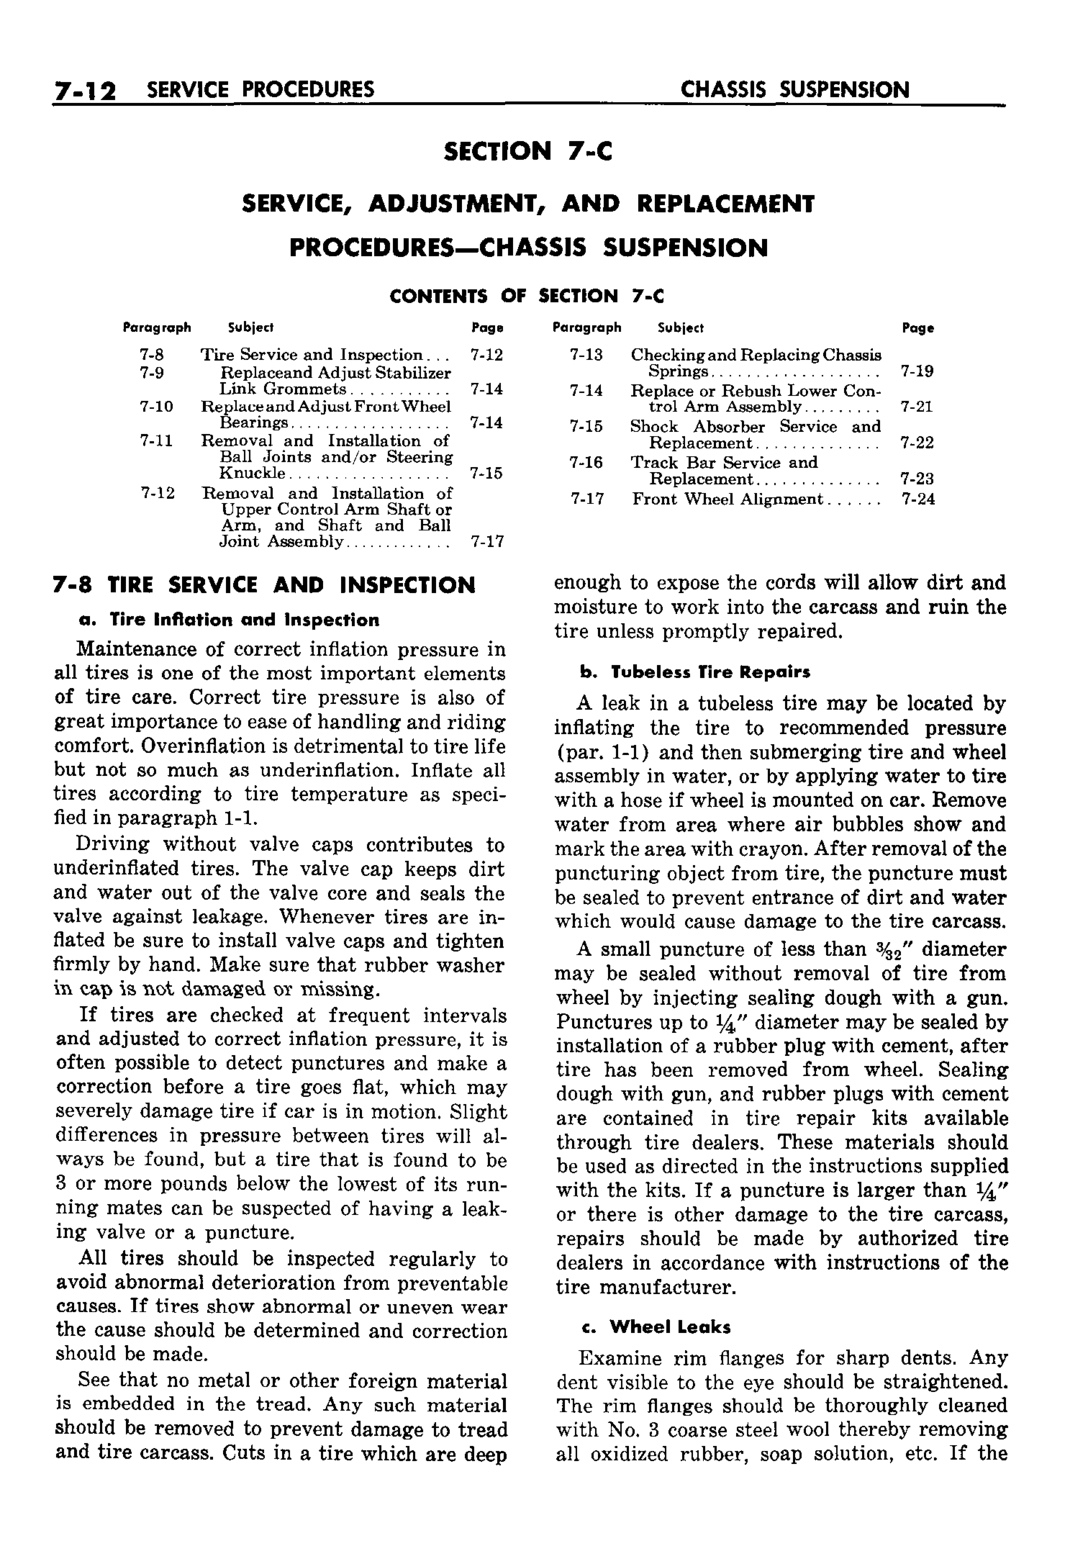 n_08 1959 Buick Shop Manual - Chassis Suspension-012-012.jpg